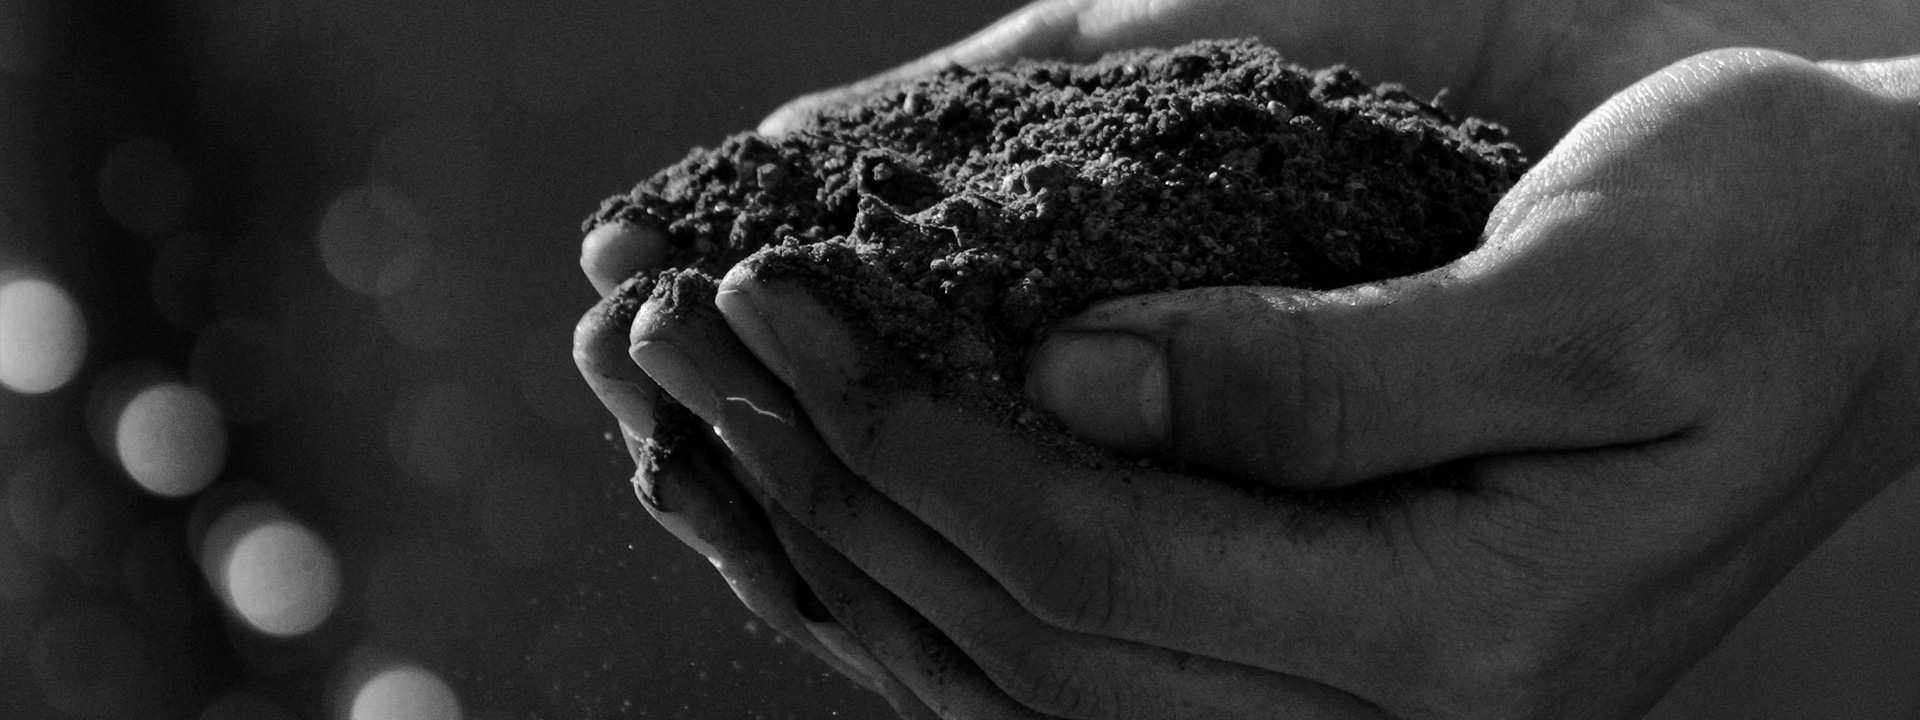 Two hands holding soil in black and white.